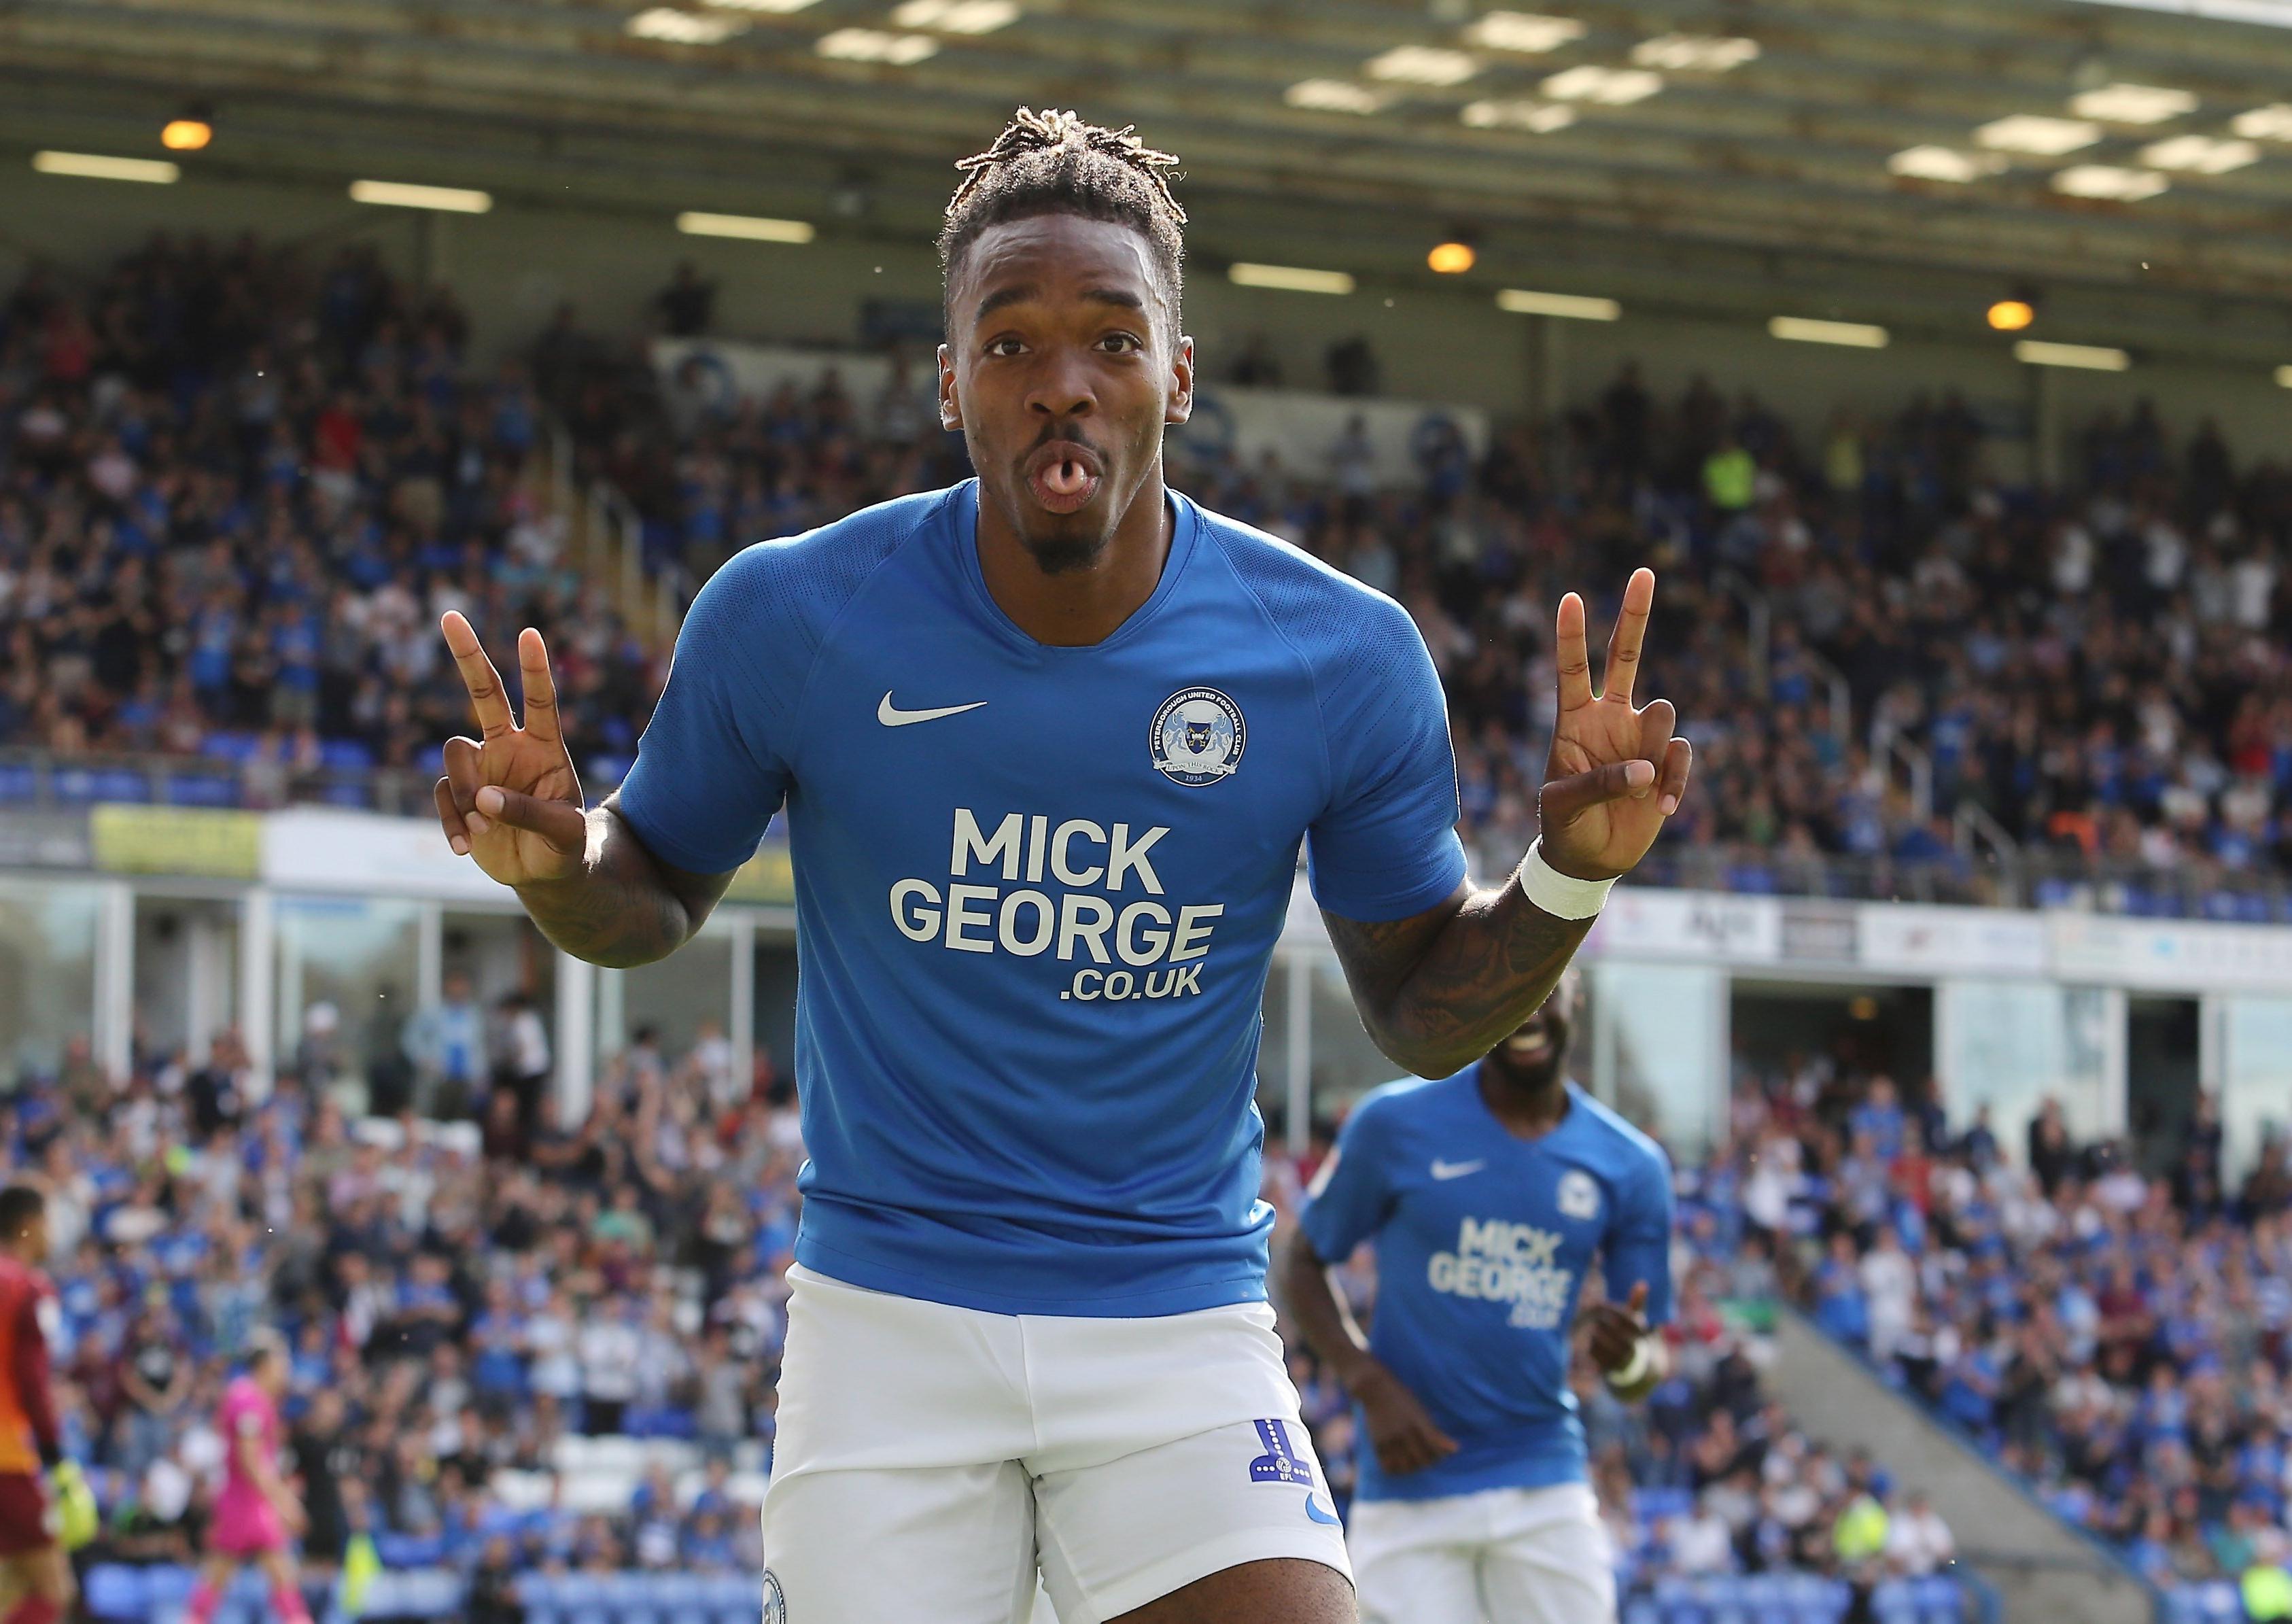 Ivan Toney was the only Posh player to pass a half century of appearances in 2019. He appeared in 51 of the 55 matches played. Joe Ward (46) was second in the appearances charts just ahead of Marcus Maddison (44).